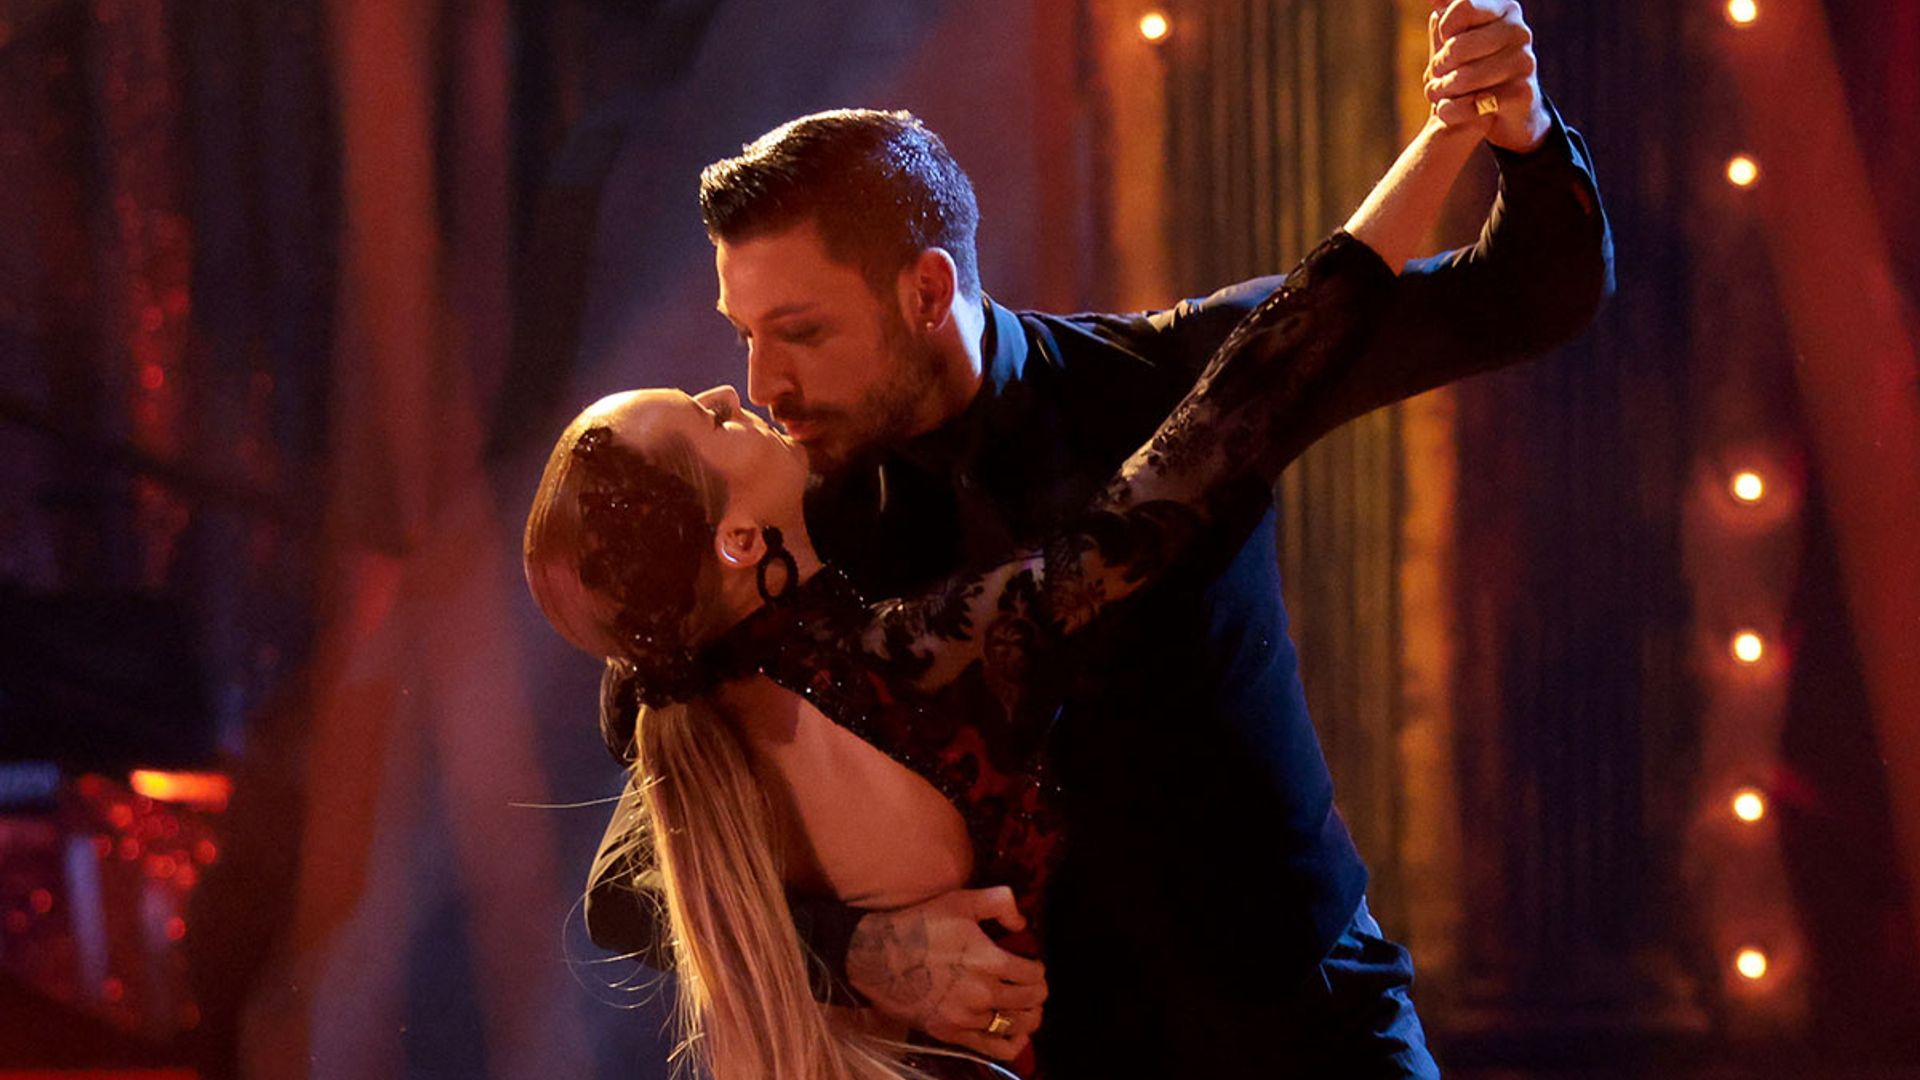 Strictly's Rose Ayling-Ellis makes touching promise to Giovanni Pernice ahead of final